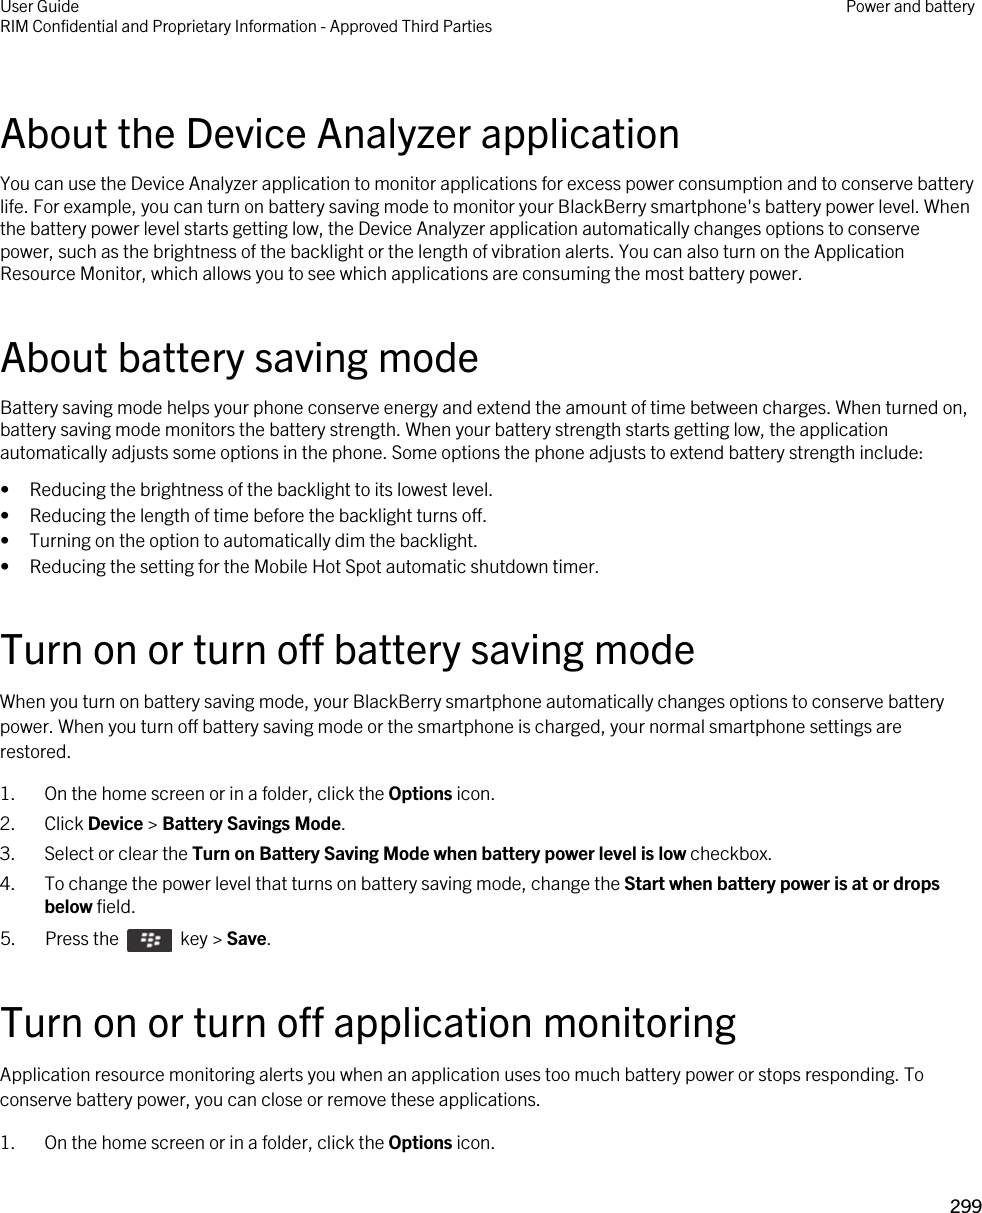 About the Device Analyzer applicationYou can use the Device Analyzer application to monitor applications for excess power consumption and to conserve battery life. For example, you can turn on battery saving mode to monitor your BlackBerry smartphone&apos;s battery power level. When the battery power level starts getting low, the Device Analyzer application automatically changes options to conserve power, such as the brightness of the backlight or the length of vibration alerts. You can also turn on the Application Resource Monitor, which allows you to see which applications are consuming the most battery power.About battery saving modeBattery saving mode helps your phone conserve energy and extend the amount of time between charges. When turned on, battery saving mode monitors the battery strength. When your battery strength starts getting low, the application automatically adjusts some options in the phone. Some options the phone adjusts to extend battery strength include:• Reducing the brightness of the backlight to its lowest level.• Reducing the length of time before the backlight turns off.• Turning on the option to automatically dim the backlight.• Reducing the setting for the Mobile Hot Spot automatic shutdown timer.Turn on or turn off battery saving modeWhen you turn on battery saving mode, your BlackBerry smartphone automatically changes options to conserve battery power. When you turn off battery saving mode or the smartphone is charged, your normal smartphone settings are restored.1. On the home screen or in a folder, click the Options icon.2. Click Device &gt; Battery Savings Mode.3. Select or clear the Turn on Battery Saving Mode when battery power level is low checkbox.4. To change the power level that turns on battery saving mode, change the Start when battery power is at or drops below field.5.  Press the    key &gt; Save. Turn on or turn off application monitoringApplication resource monitoring alerts you when an application uses too much battery power or stops responding. To conserve battery power, you can close or remove these applications.1. On the home screen or in a folder, click the Options icon.User GuideRIM Confidential and Proprietary Information - Approved Third Parties Power and battery299 